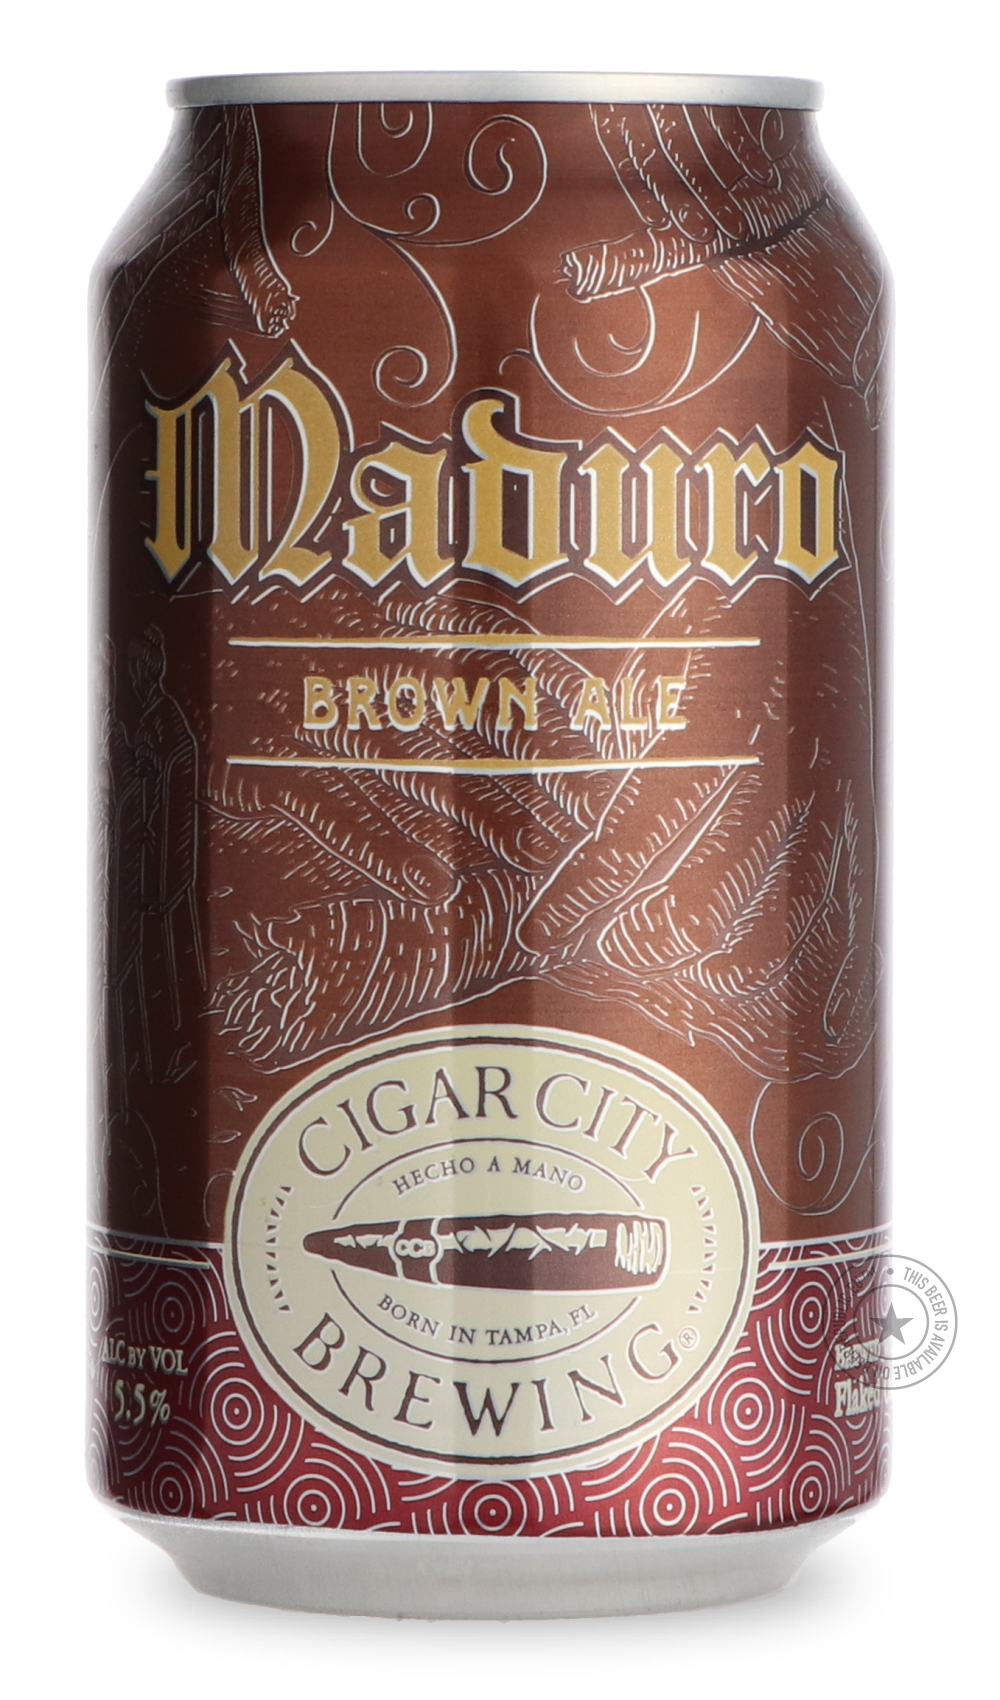 -Cigar City- Maduro-Brown & Dark- Only @ Beer Republic - The best online beer store for American & Canadian craft beer - Buy beer online from the USA and Canada - Bier online kopen - Amerikaans bier kopen - Craft beer store - Craft beer kopen - Amerikanisch bier kaufen - Bier online kaufen - Acheter biere online - IPA - Stout - Porter - New England IPA - Hazy IPA - Imperial Stout - Barrel Aged - Barrel Aged Imperial Stout - Brown - Dark beer - Blond - Blonde - Pilsner - Lager - Wheat - Weizen - Amber - Barl